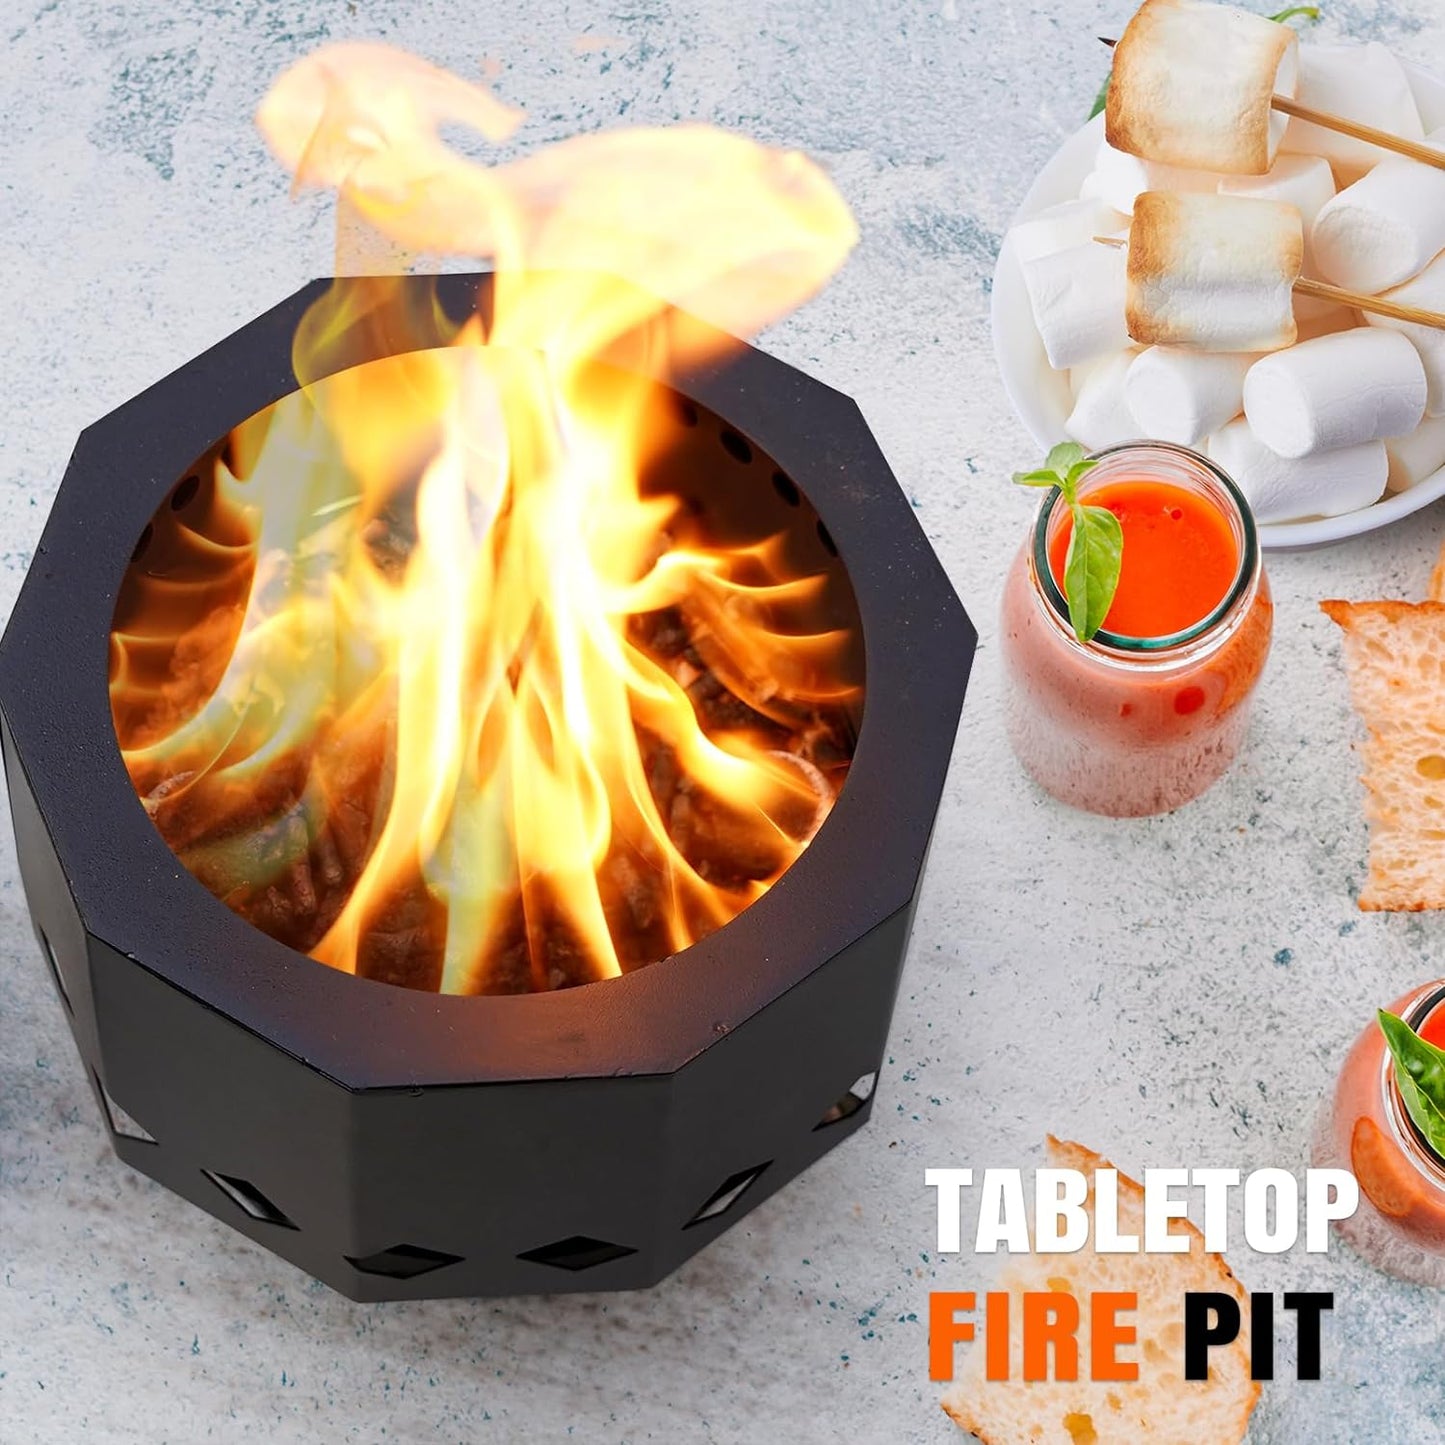 Tabletop Fire Pit - Portable Small Firepit Bowl with Carrying Bag, 8"